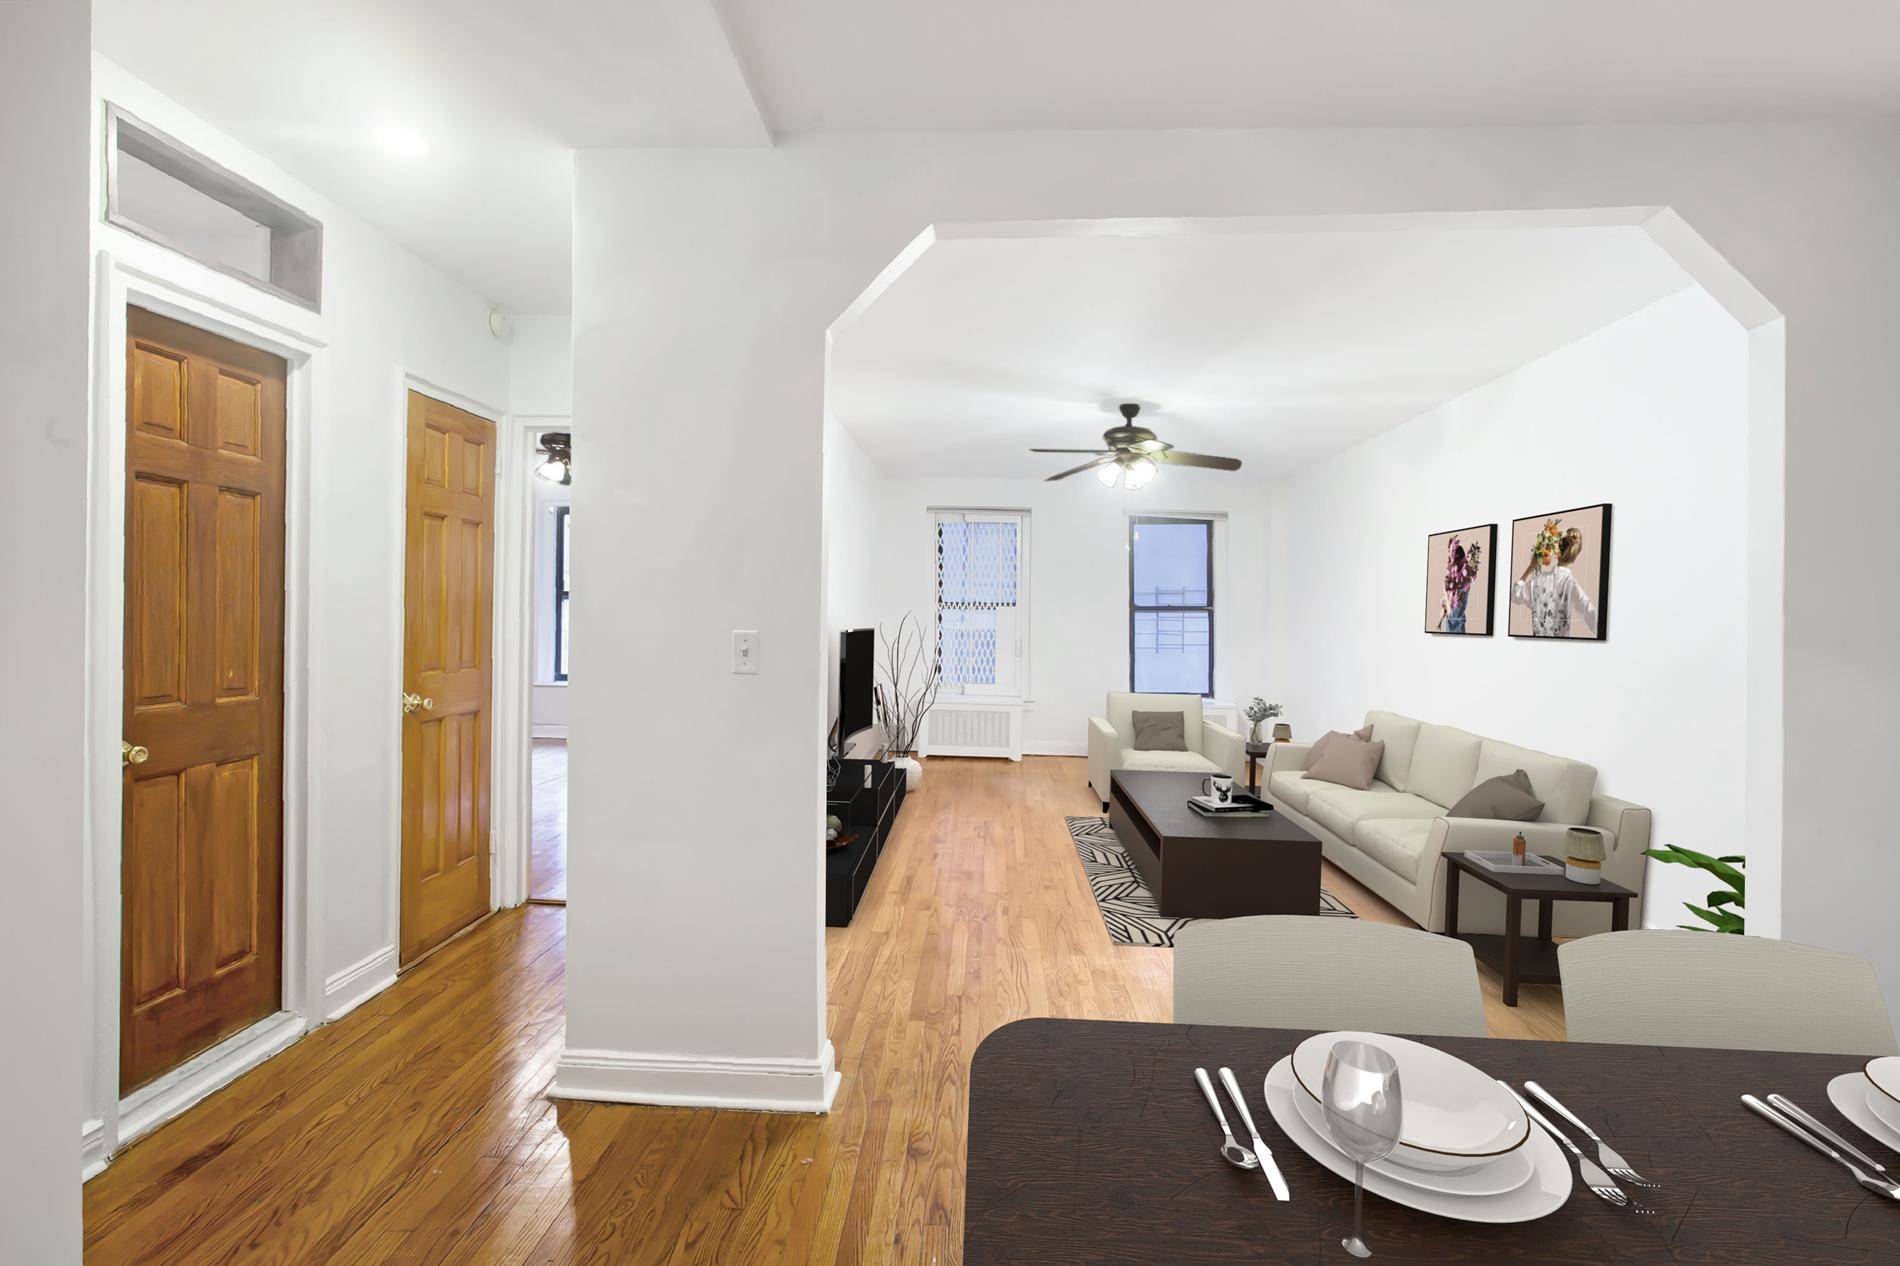 Don't miss this oversized and charming prewar 1BR home, featuring generous closet space, shiny hardwood floors, authentic Art Deco details and much more.